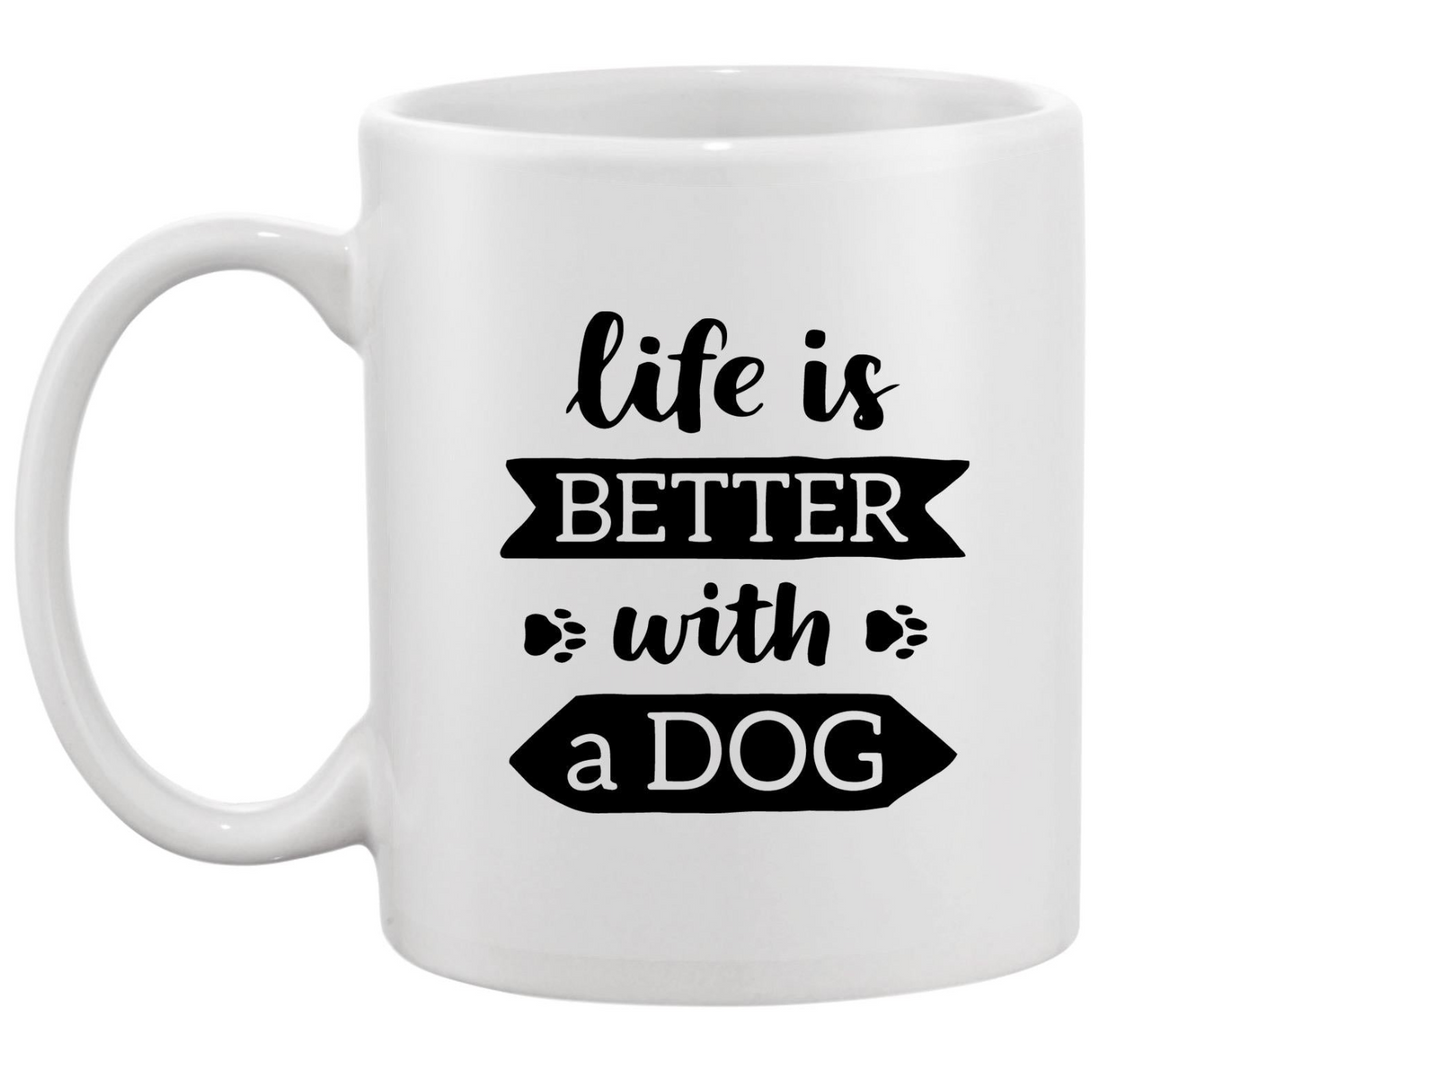 Life Is Better With A Dog Slogan Mug -Image by Shutterstock